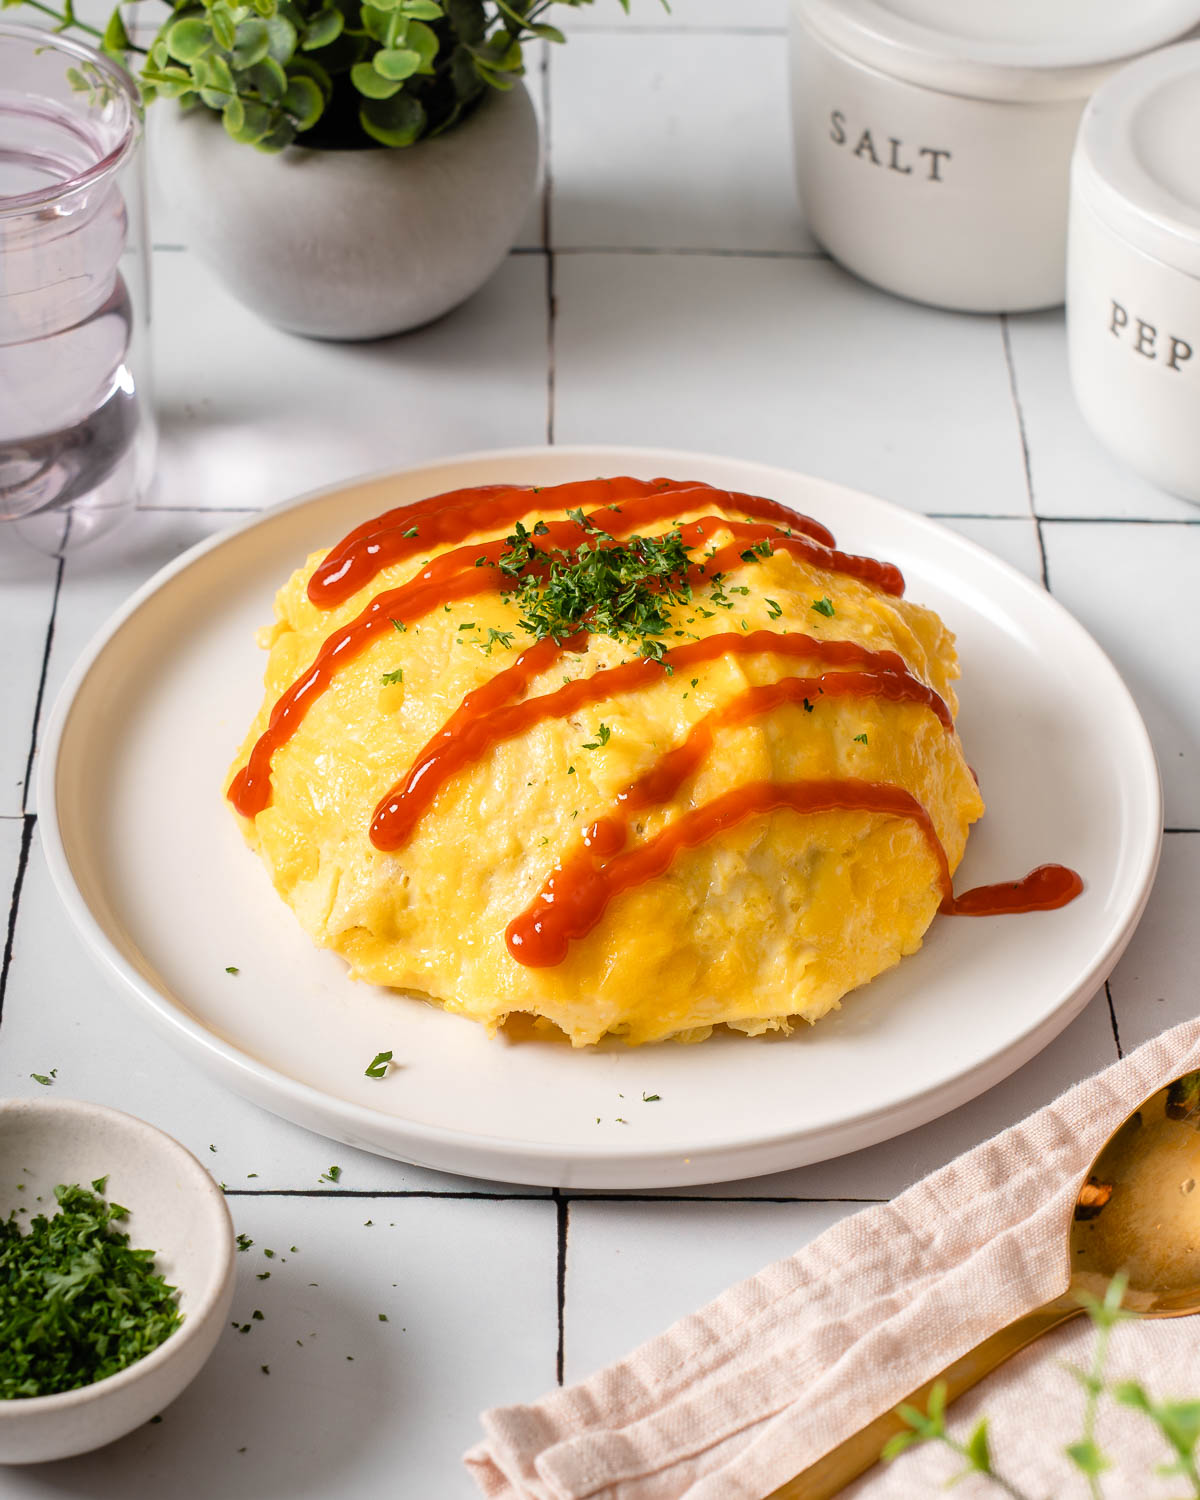 A plate with an omurice japanese rice omelete on it garnished and ready to eat.